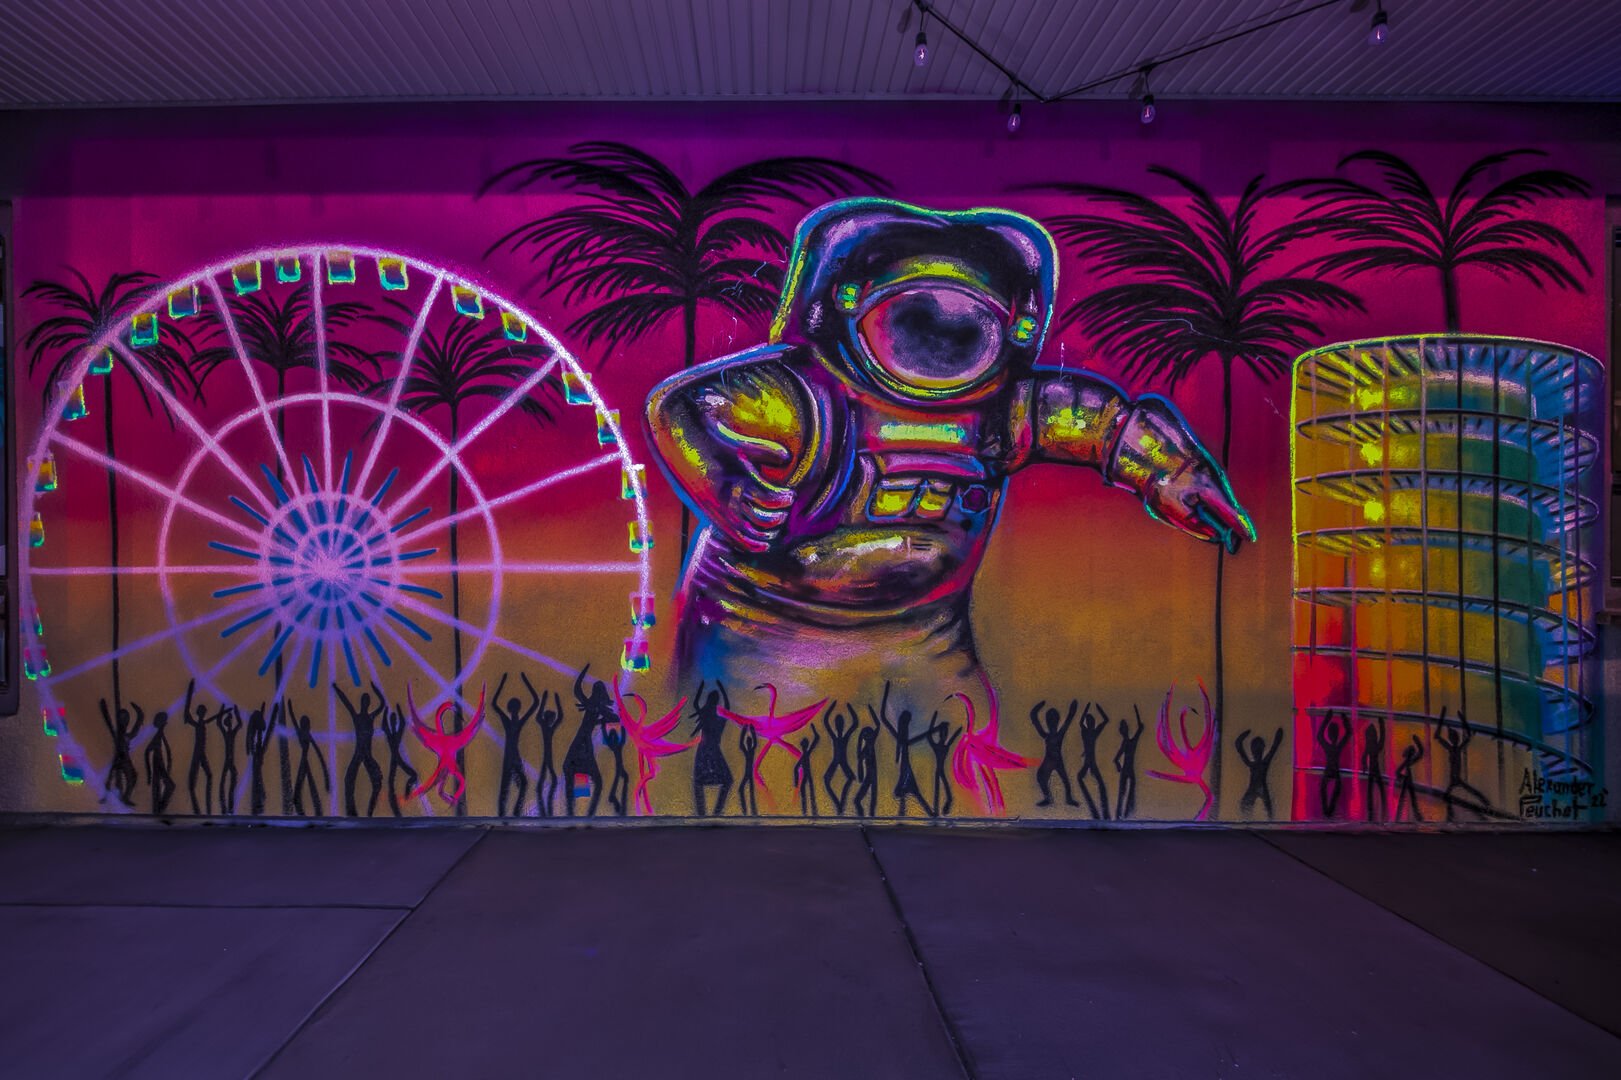 Enjoy the artwork day and night with the black light bringing this painting to life!